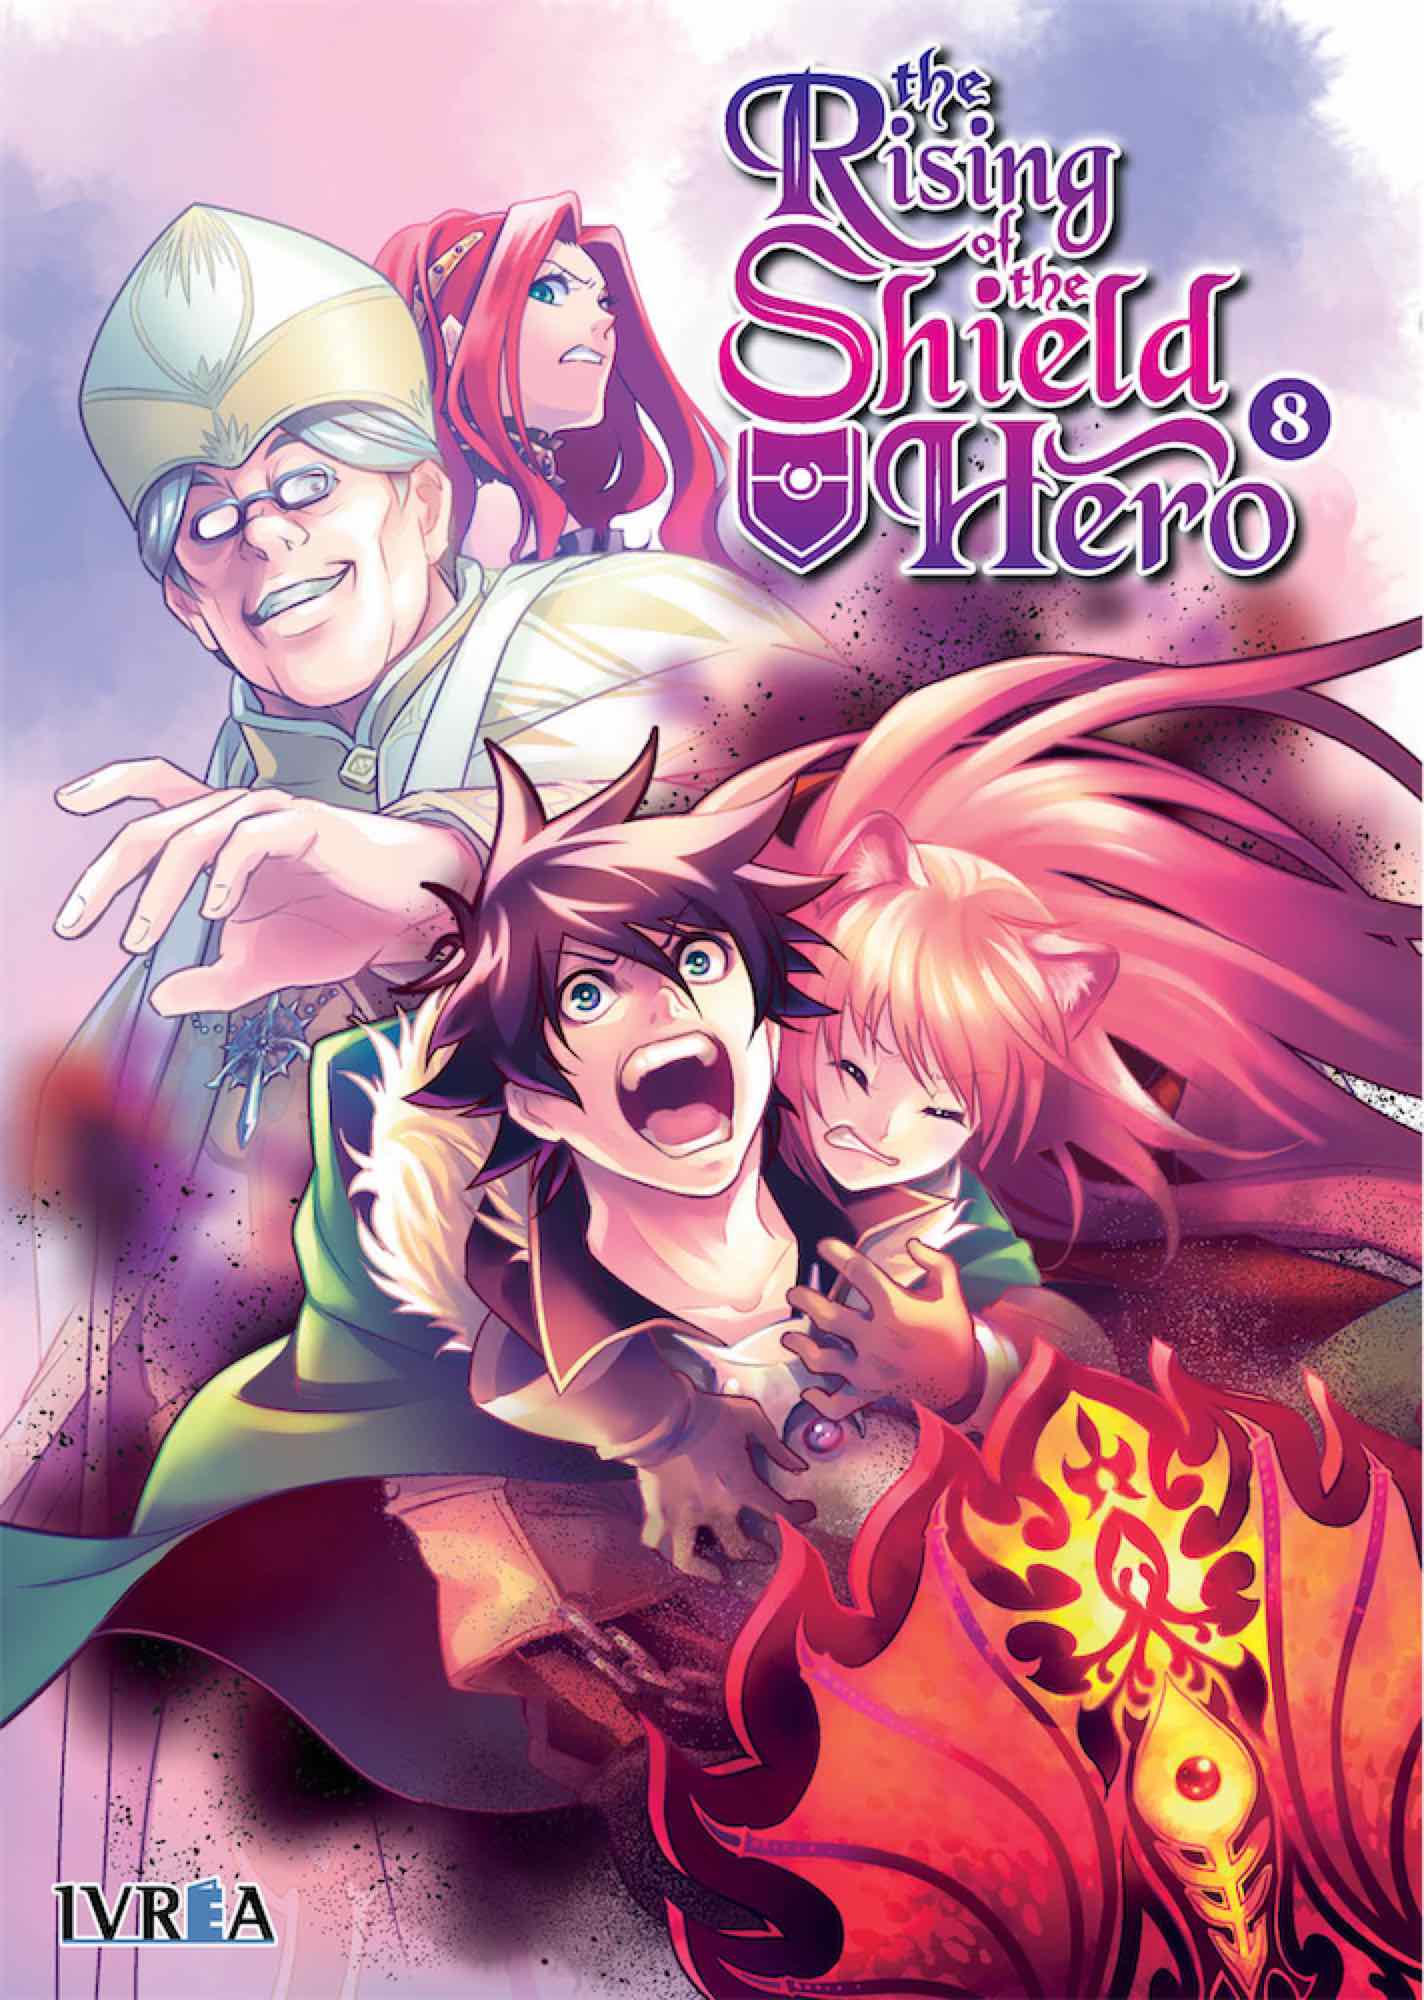 THE RISING OF THE SHIELD HERO 08